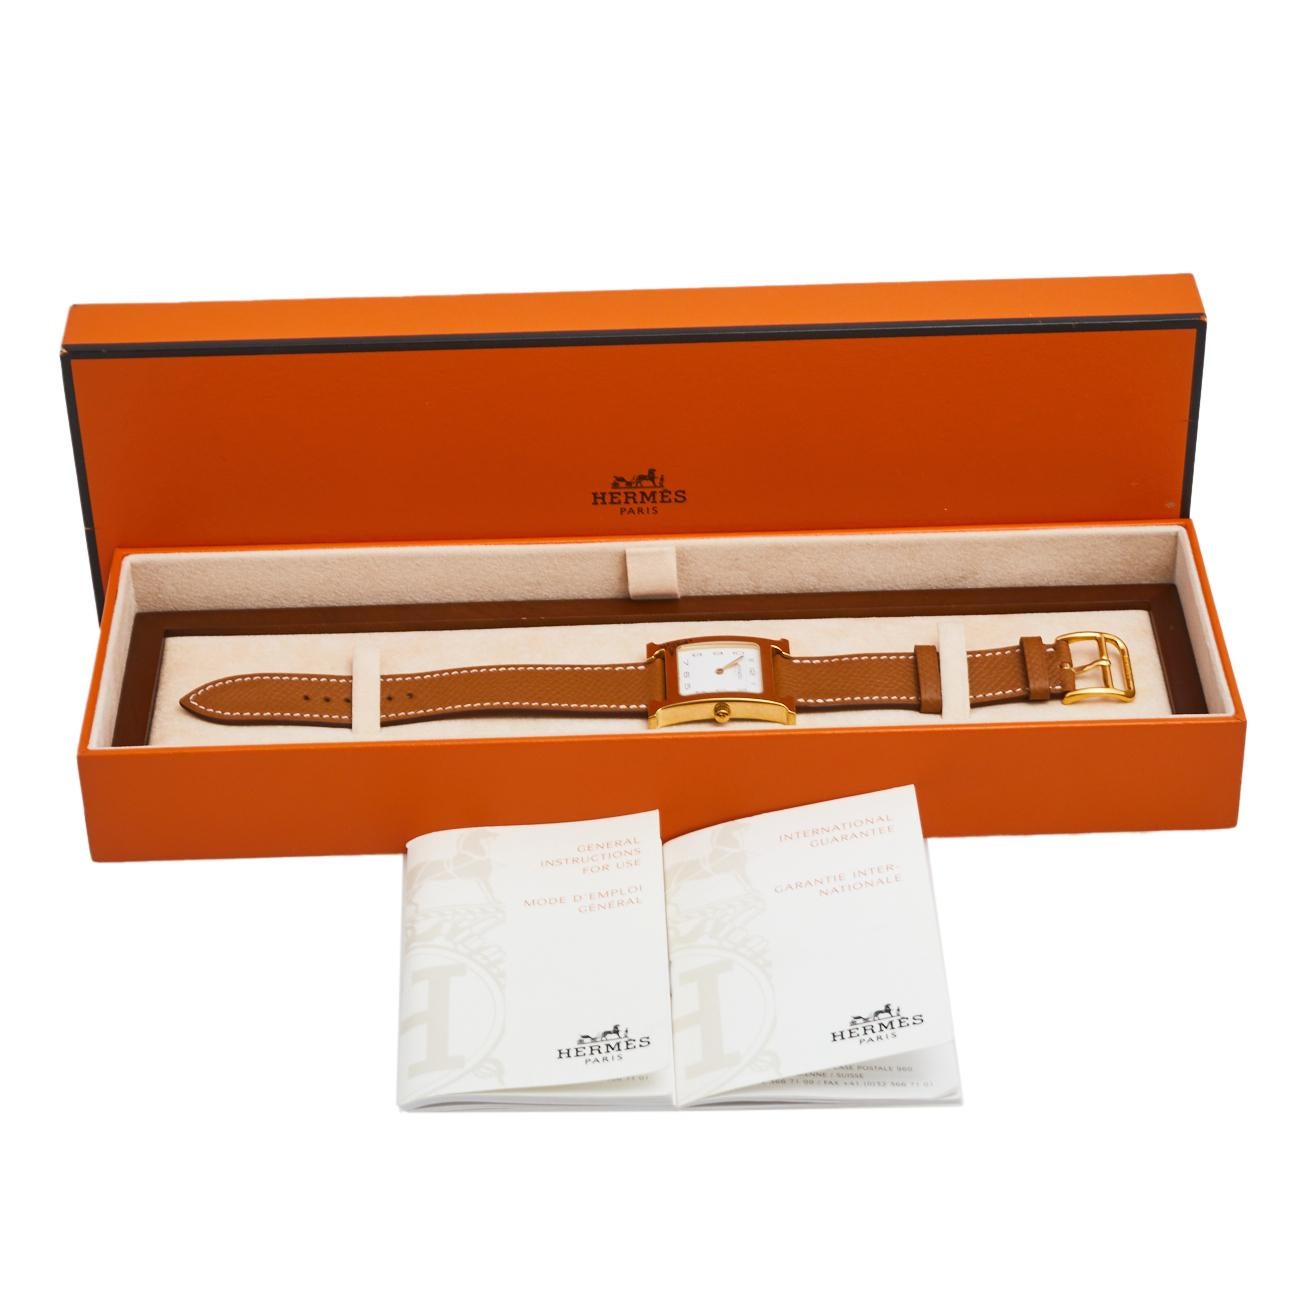 This Heure H watch from Hermes stands for quality and sophistication. The watch features a signature 'H' case in gold-plated stainless steel and held by leather straps with buckle fastenings. Powered by quartz movement, this elegant timepiece has a